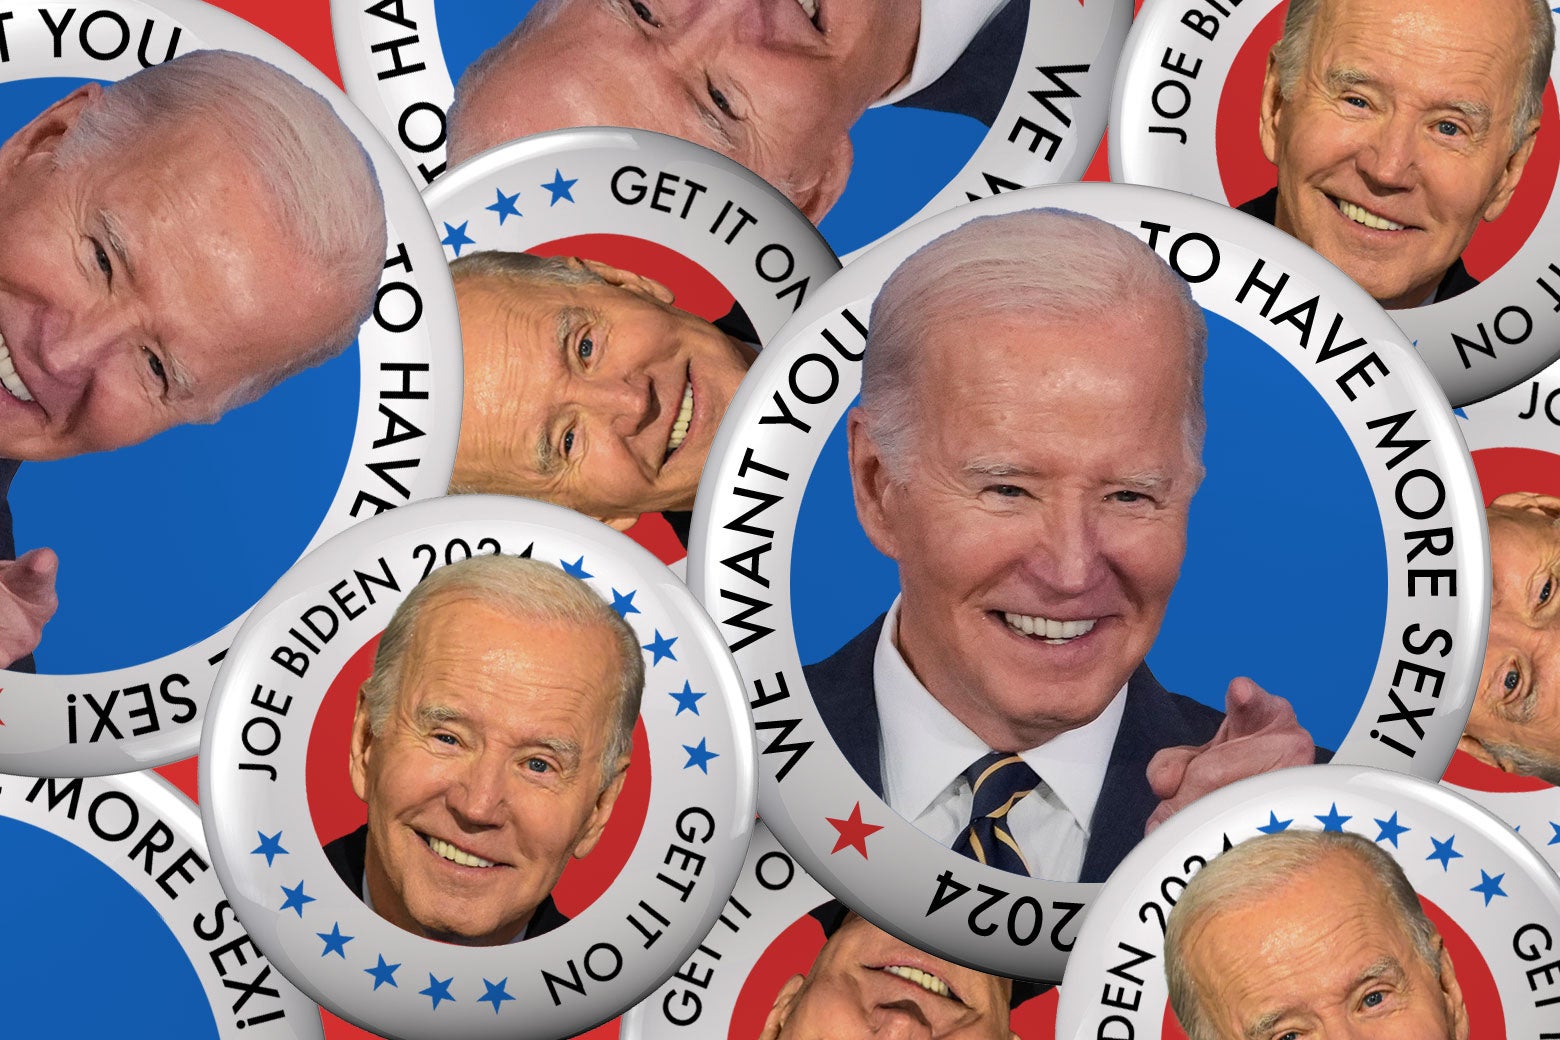 A collage of pins with Joe Biden campaign 2024 encouraging people to "Get it on" and "Have more sex."